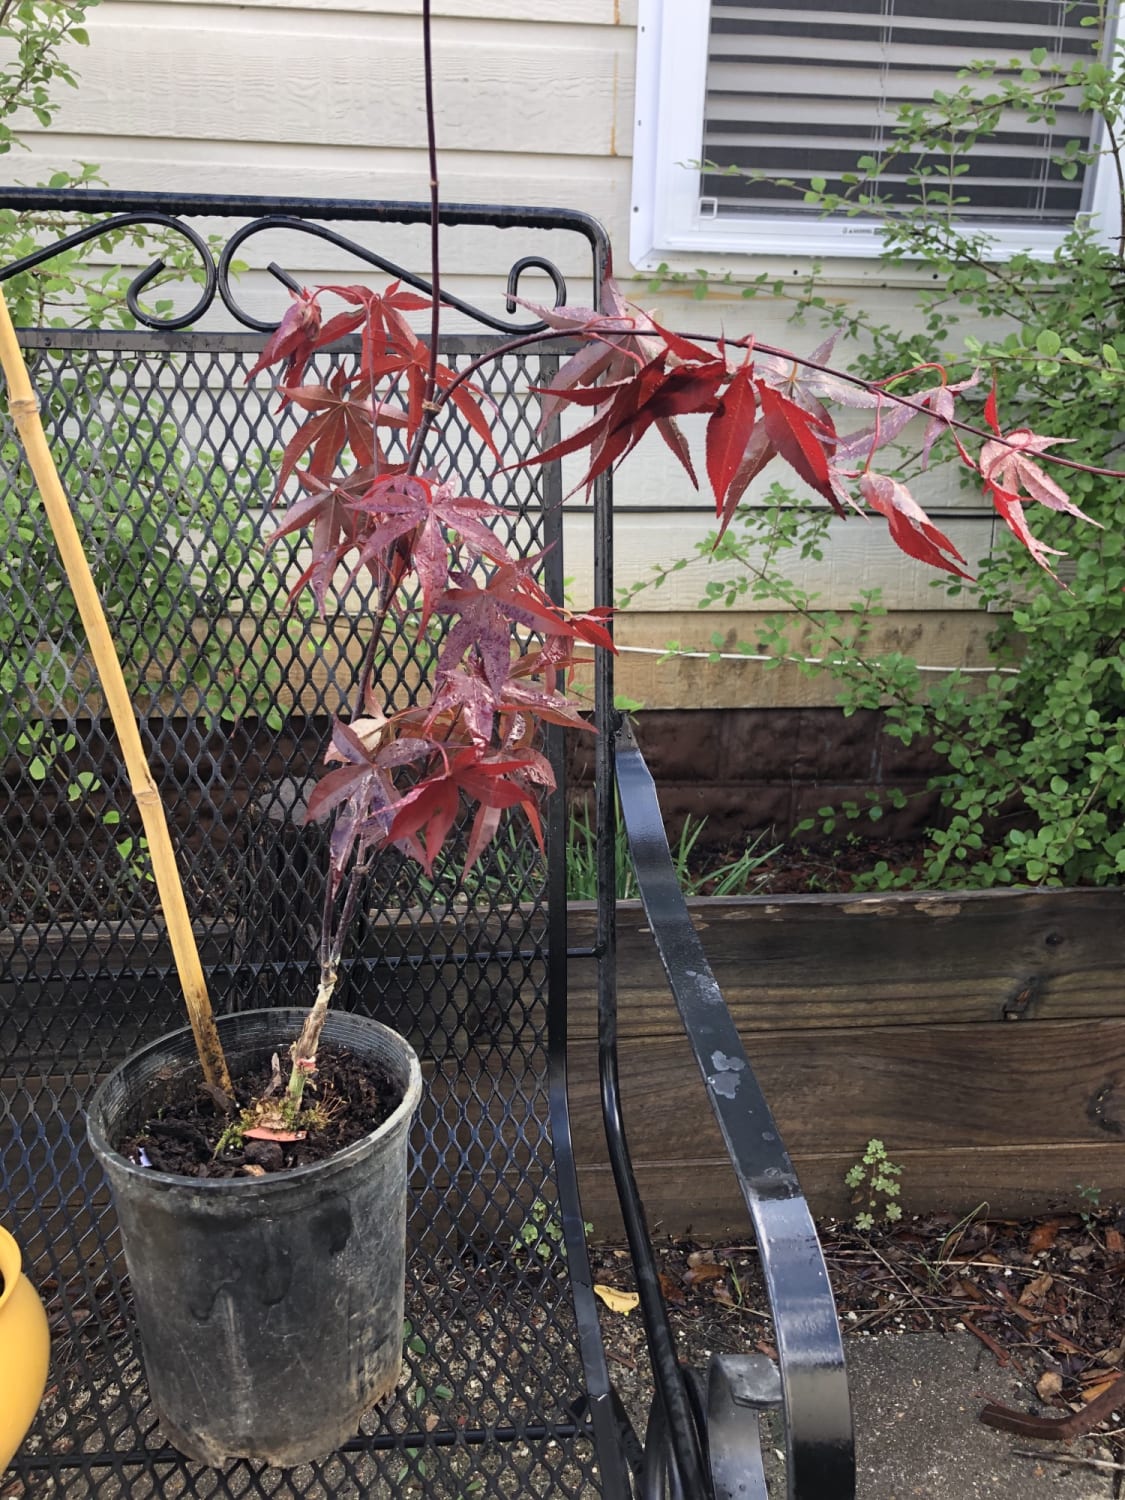 found this japanese maple at walmart for $15, hopefully it can turn into something nice!